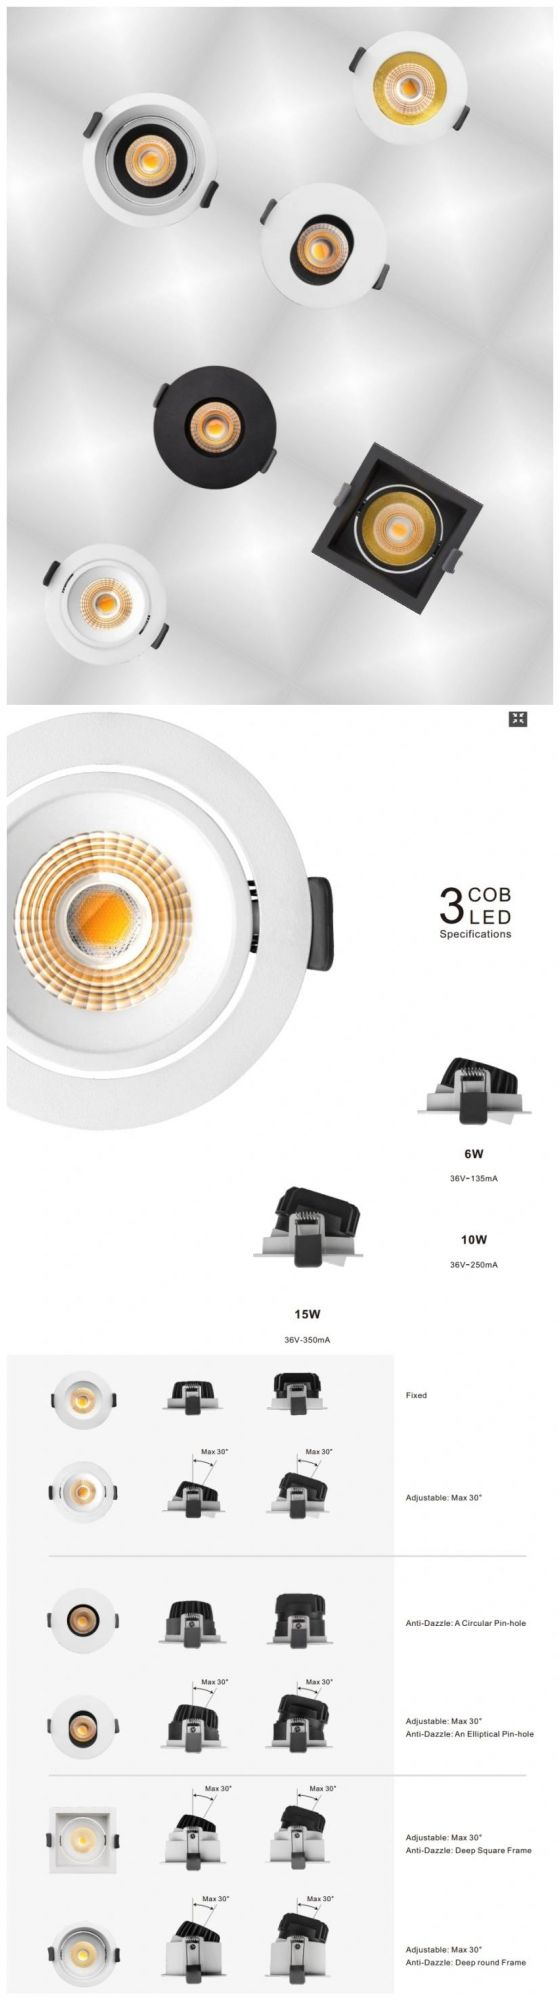 R6914 High Quality Recessed LED Down Light with CE Certification